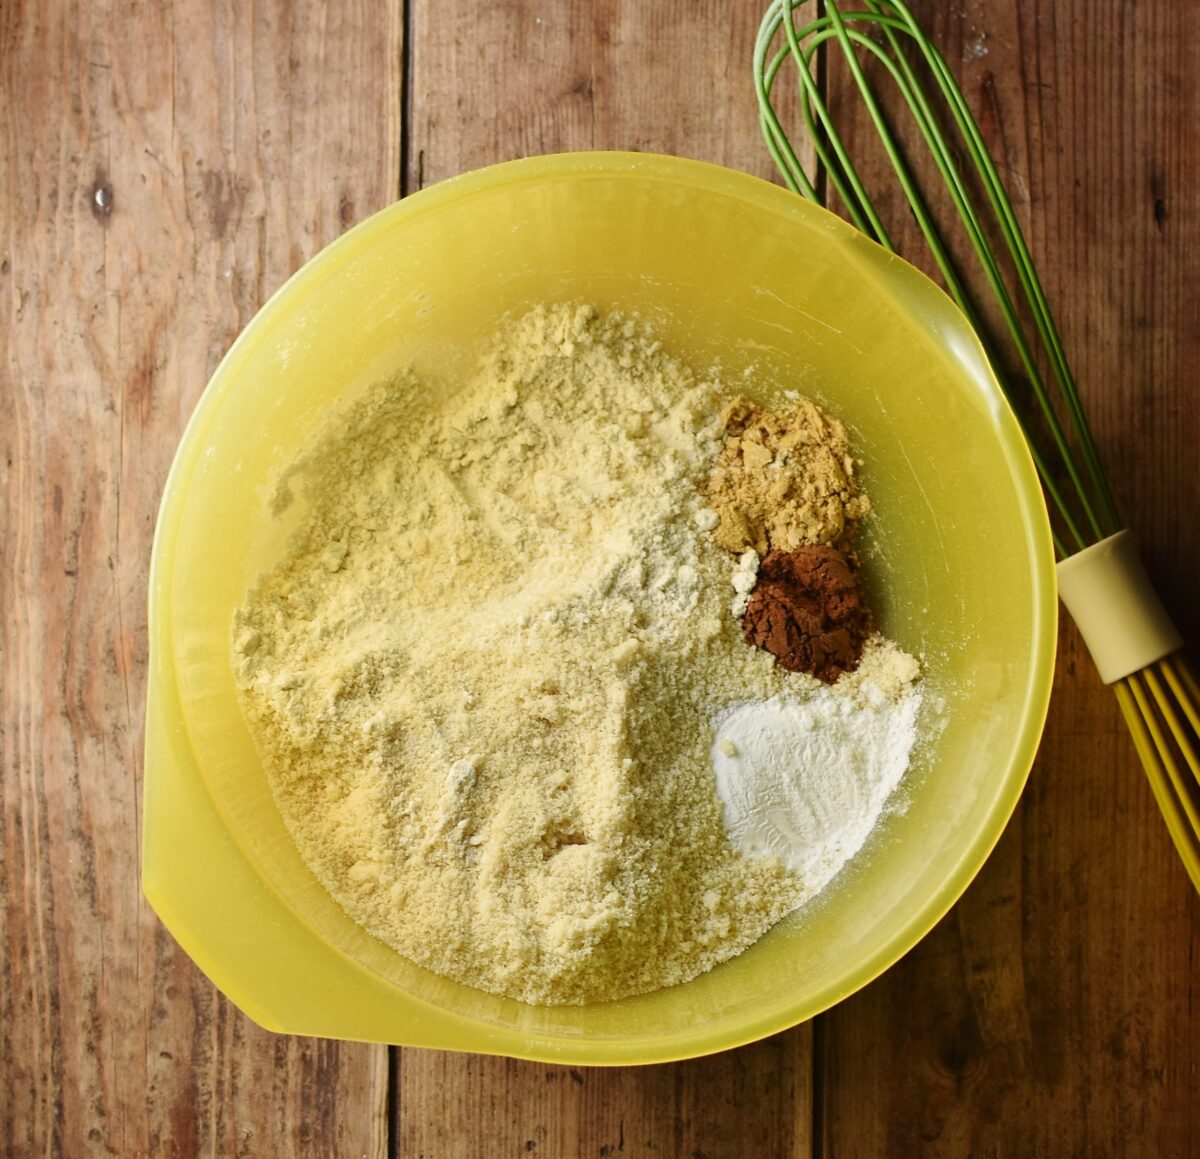 Flour and spice in large yellow bowl with green whisk.